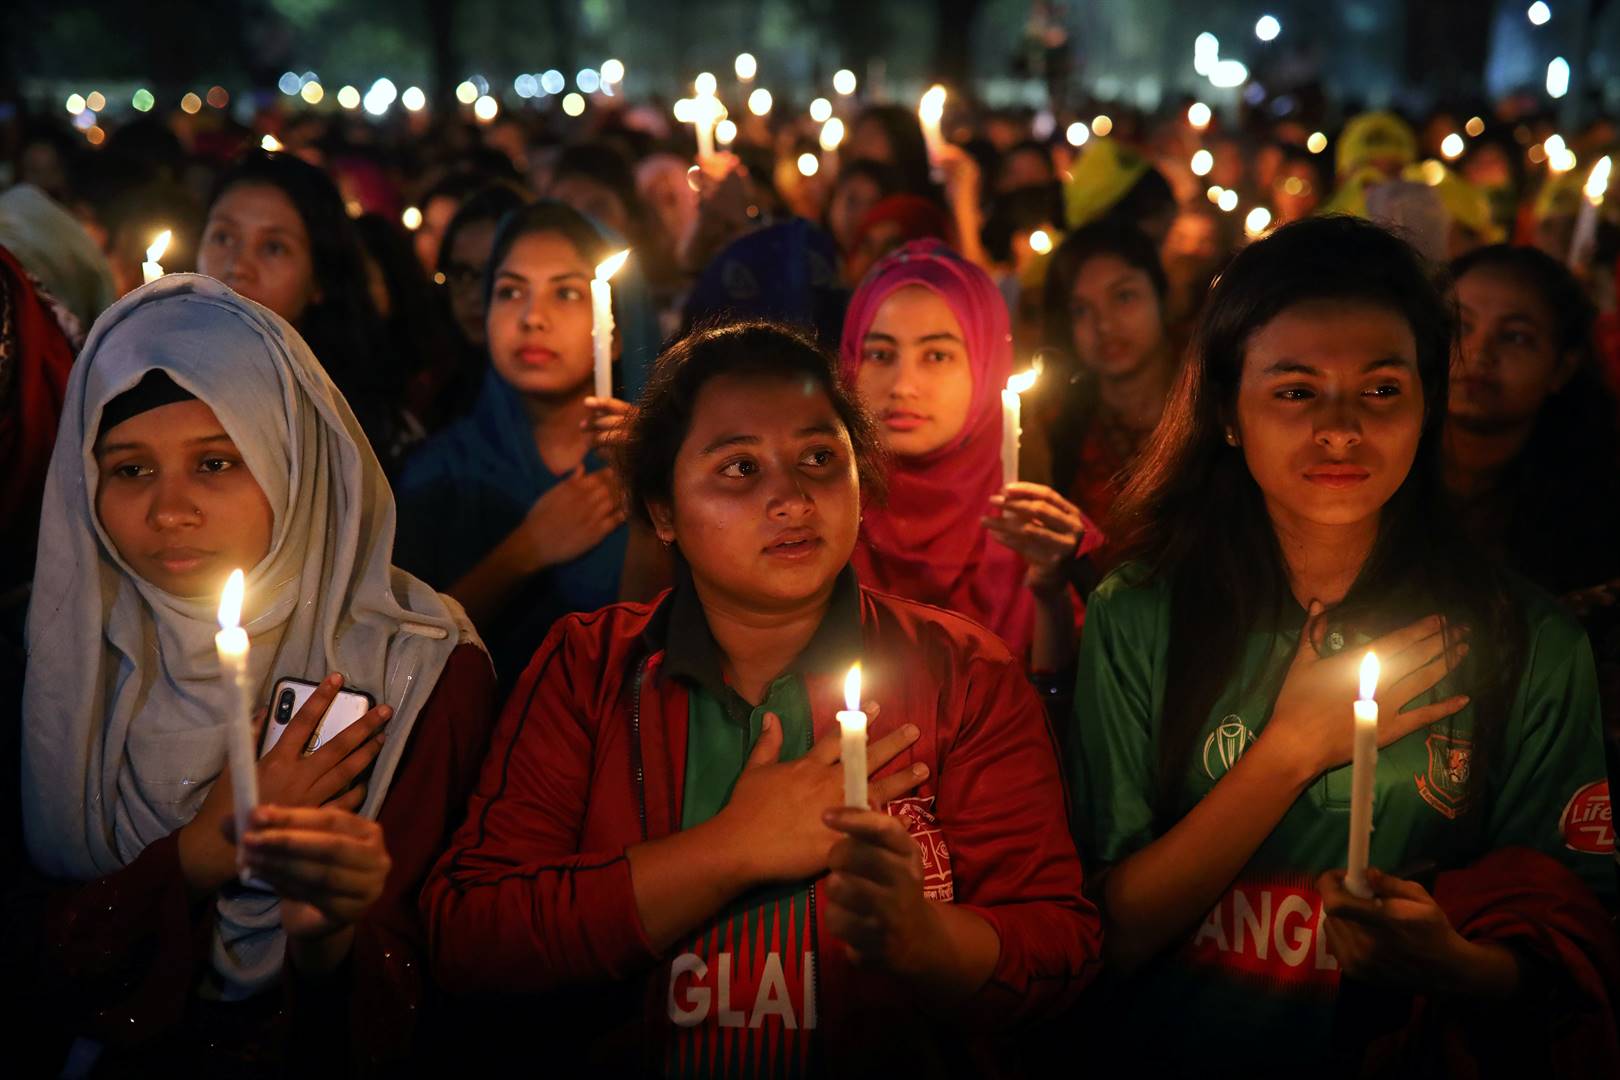  Women from different organisations light candles to mark the International Women's Day in Dhaka, Bangladesh in March. A UN report has highlighted how women in developing countries still have no say of their own bodies and decisions are made for them. Picture: Reuters / Mohammad Ponir Hossain